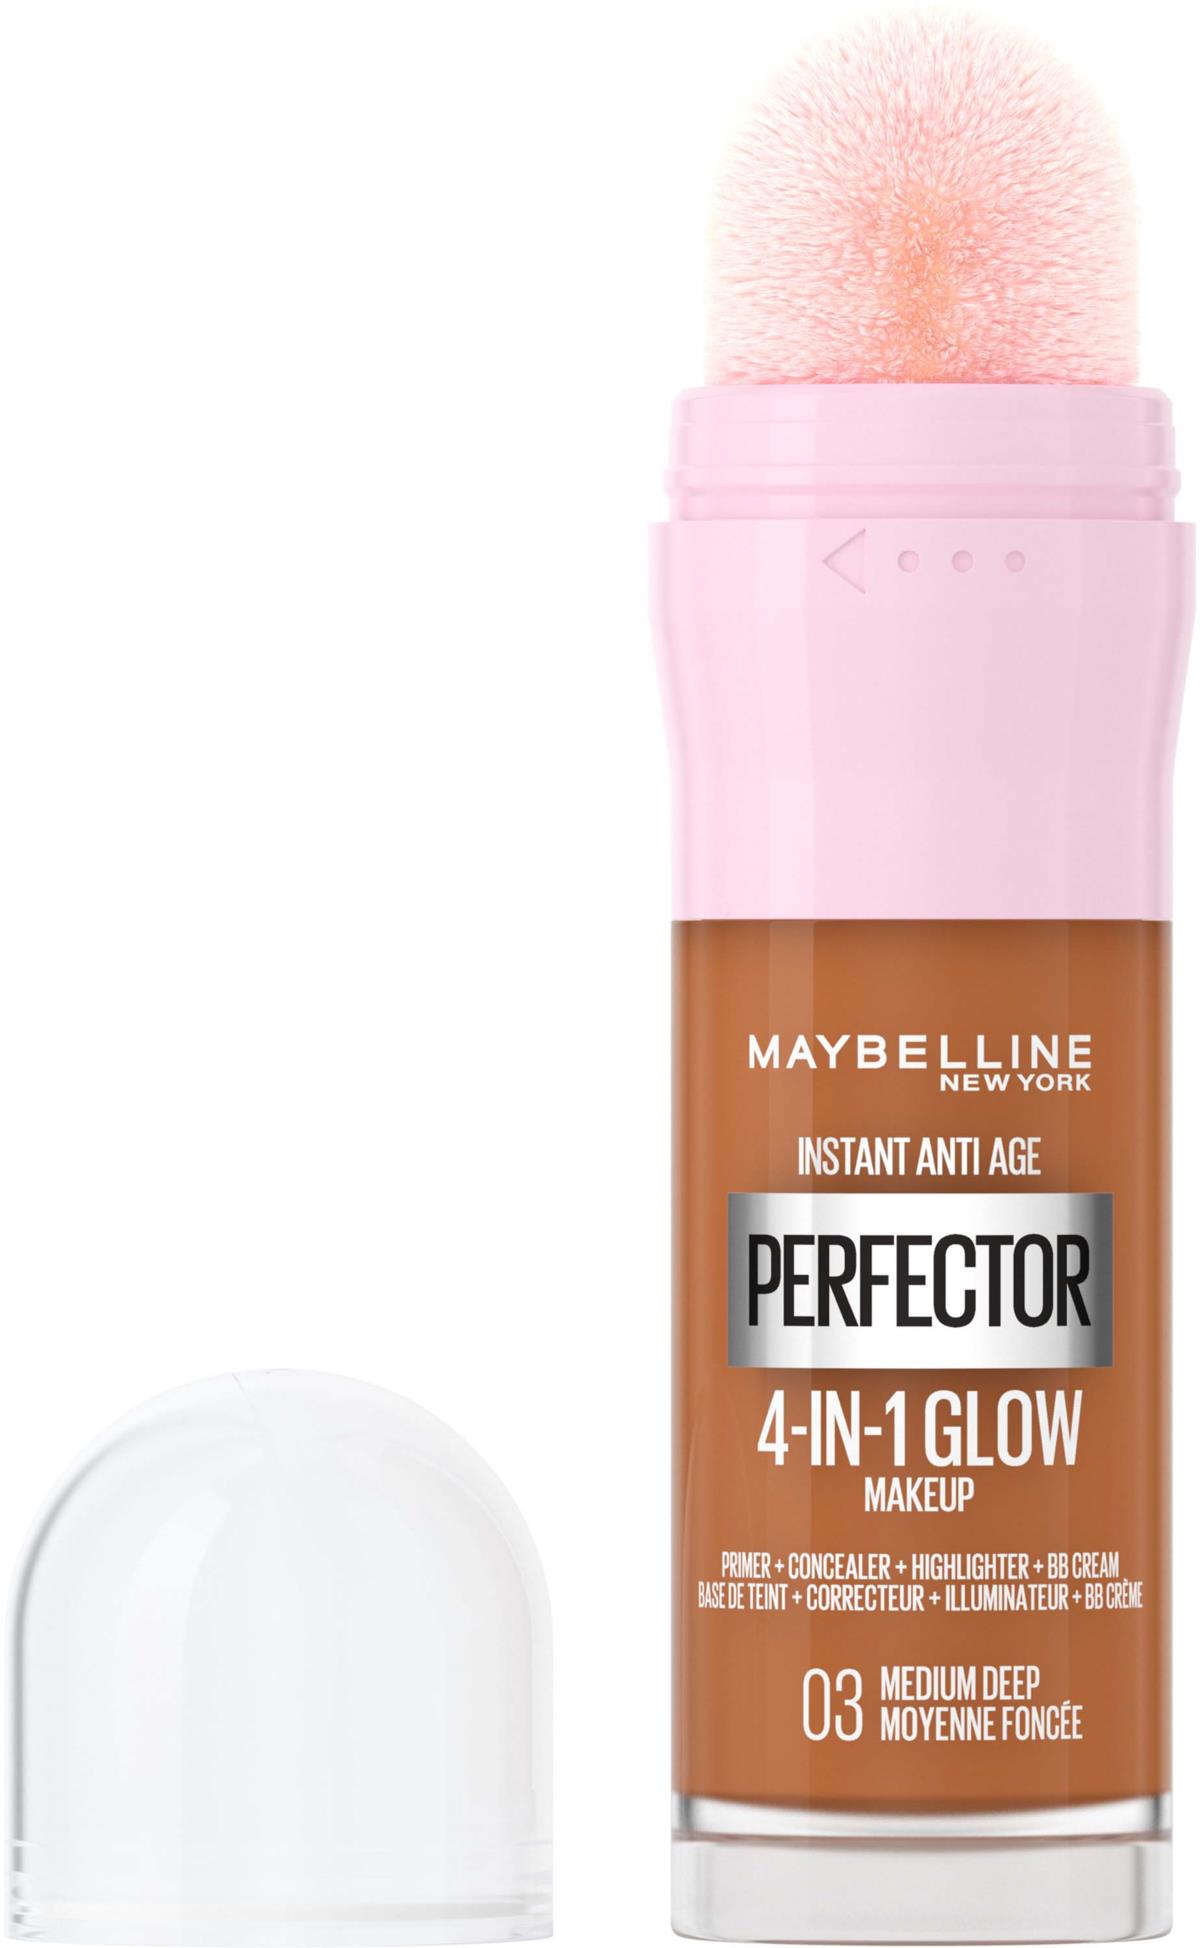 Maybelline New York Instant Anti-Age Perfector 4-in-1 Glow Makeup 03 Medium Deep